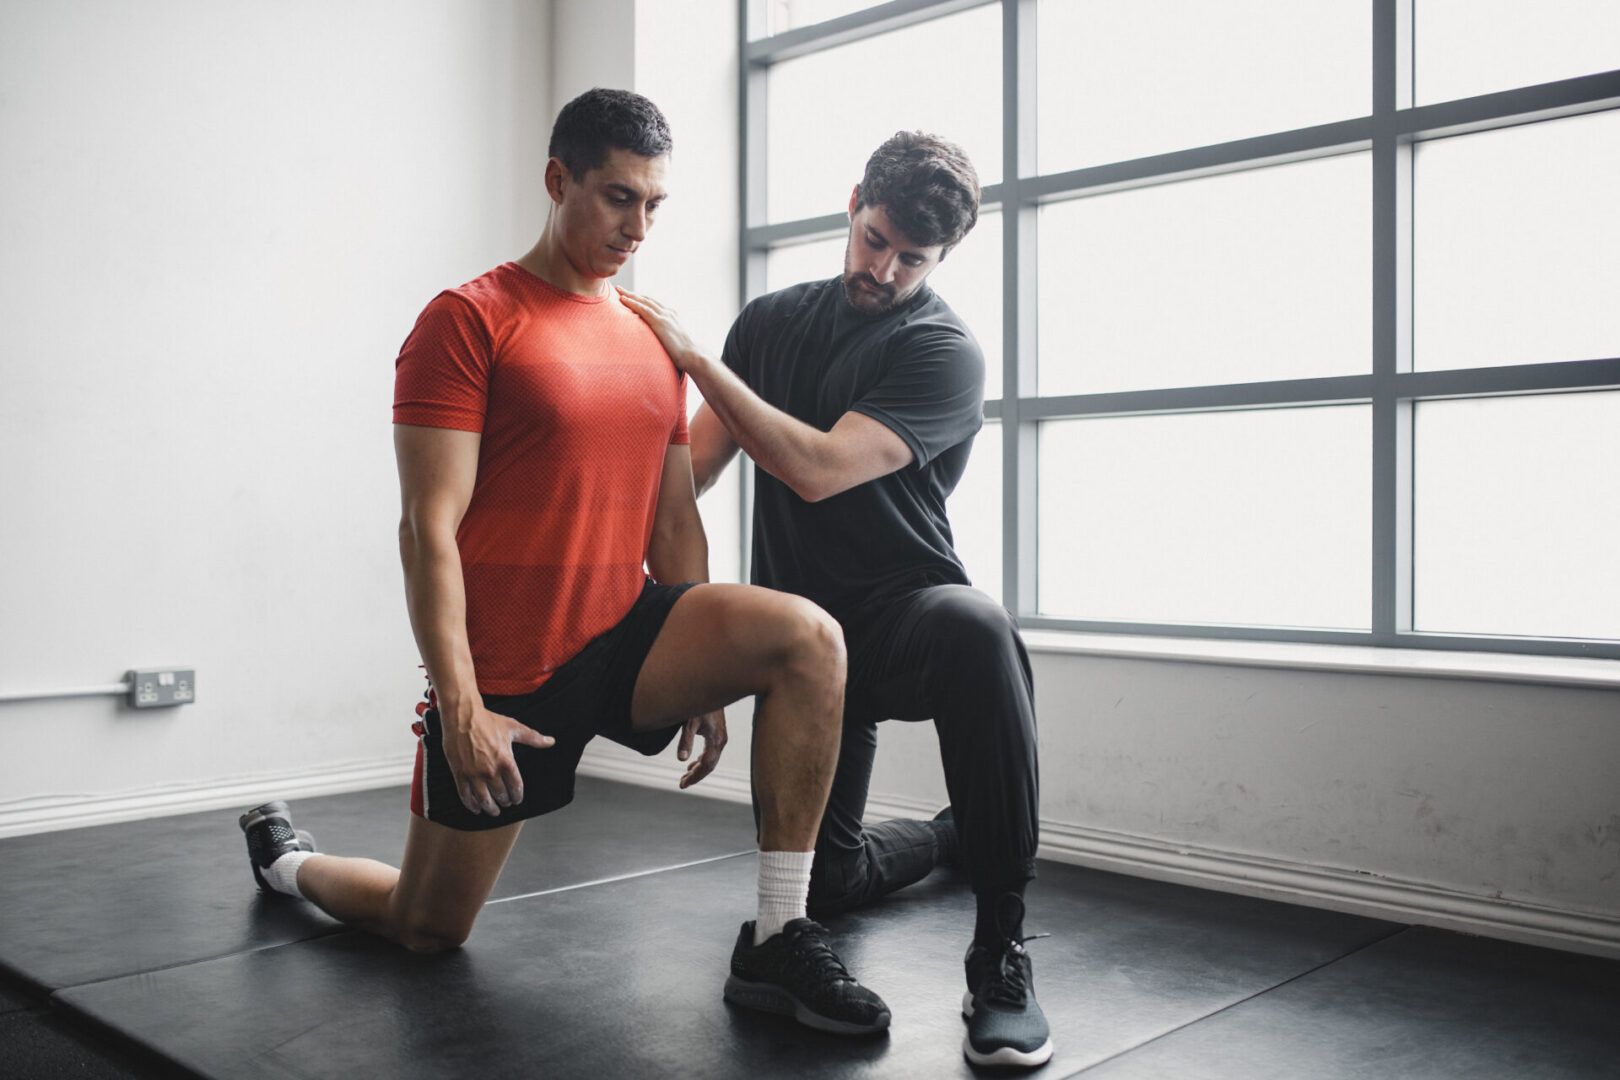 Two men are doing exercises in a gym.